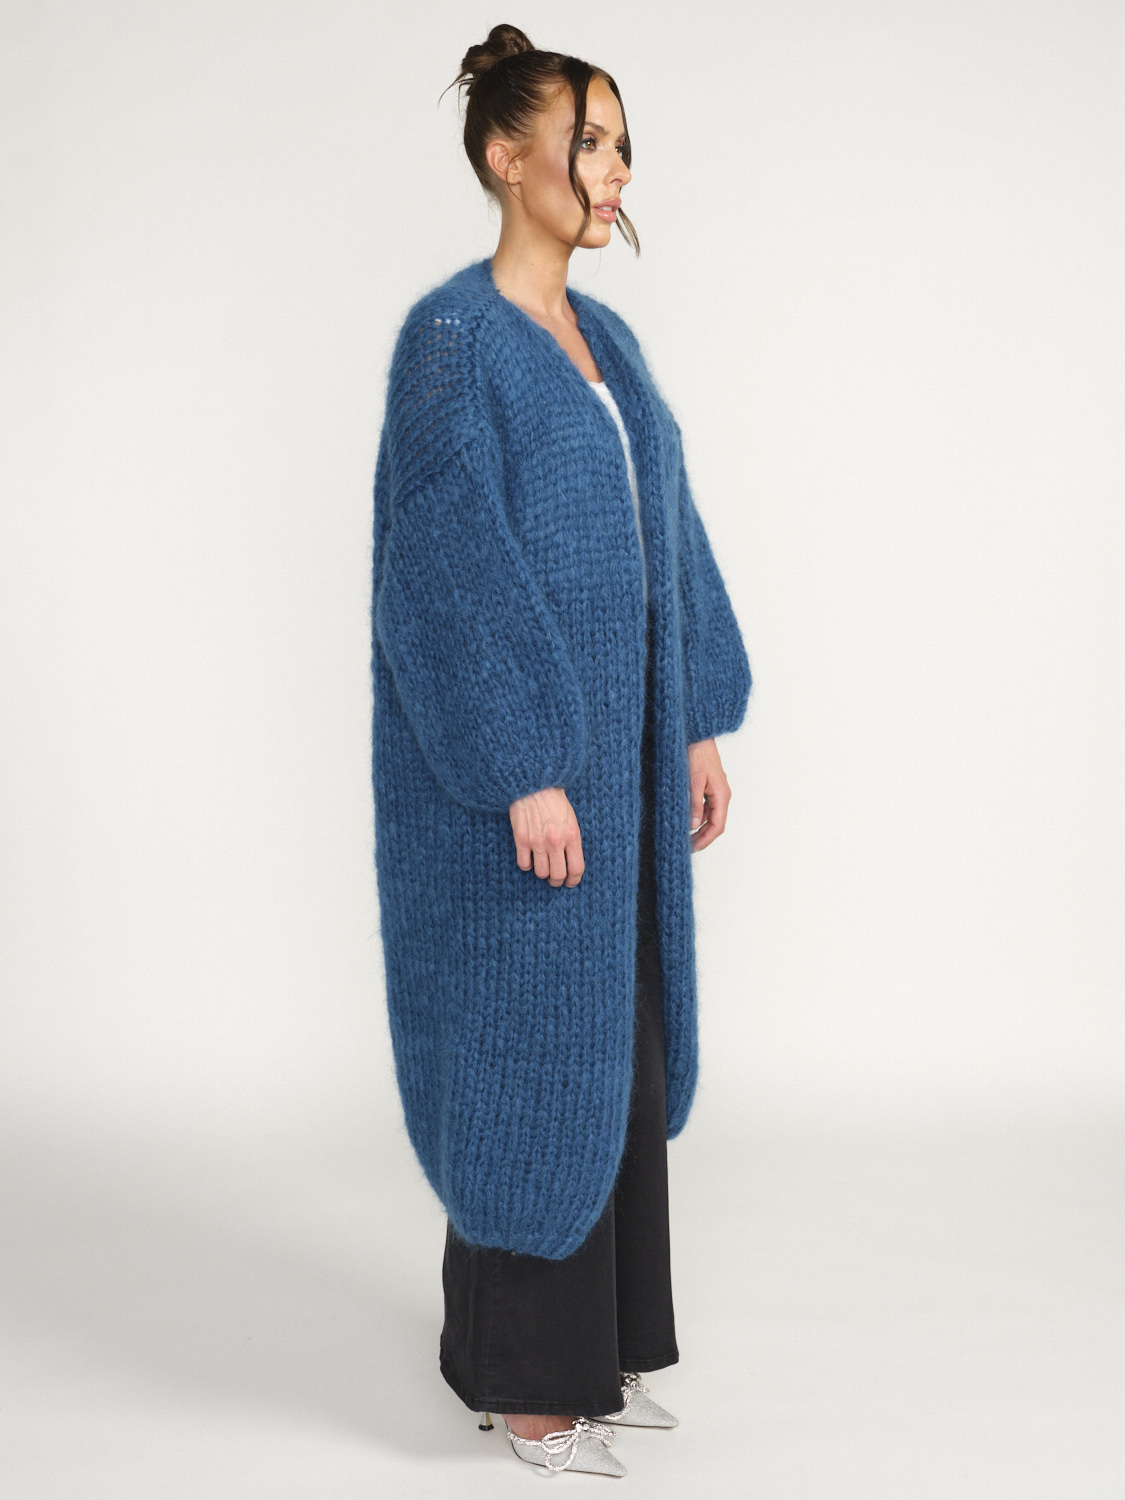 Maiami Mohair Big Coat - Cardigan with wide sleeves in mohair blue One Size